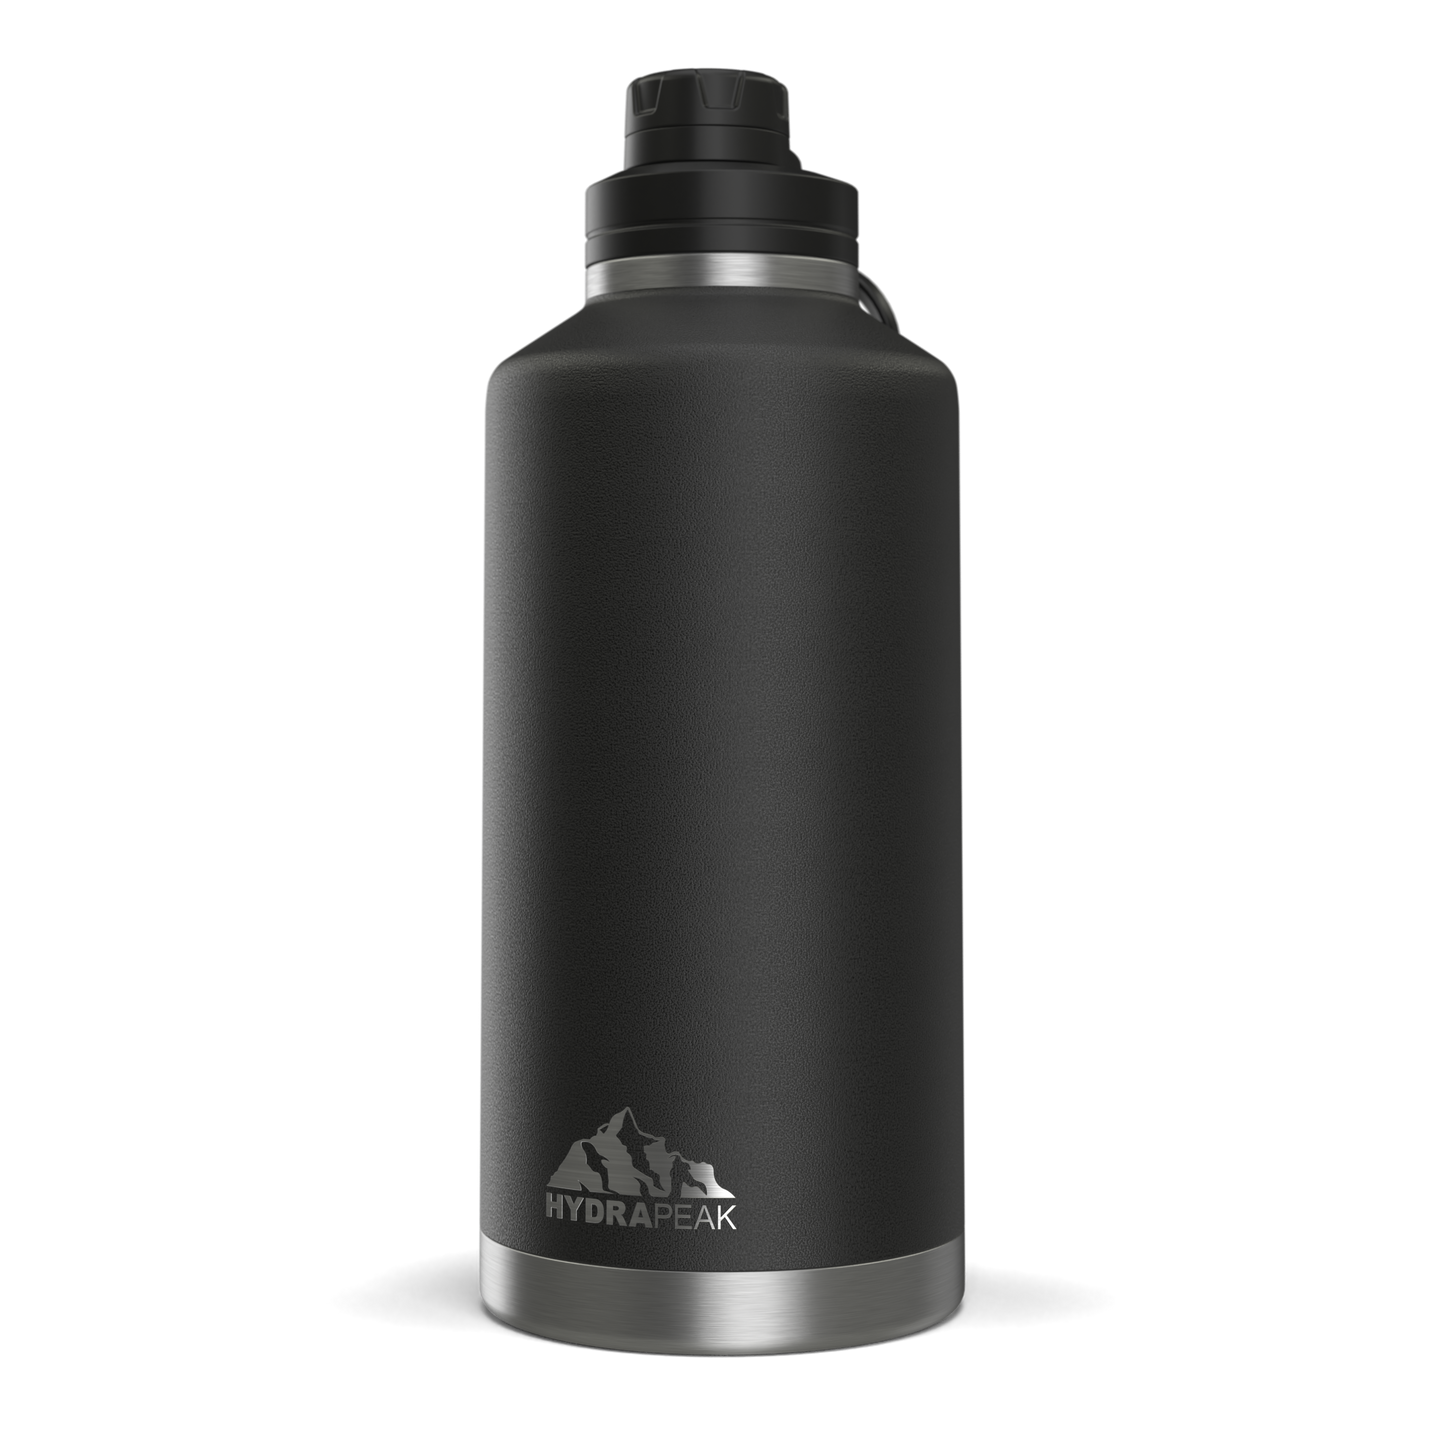 72oz Stainless Steel Insulated Water Bottle With Flexible Chug Lid- Black